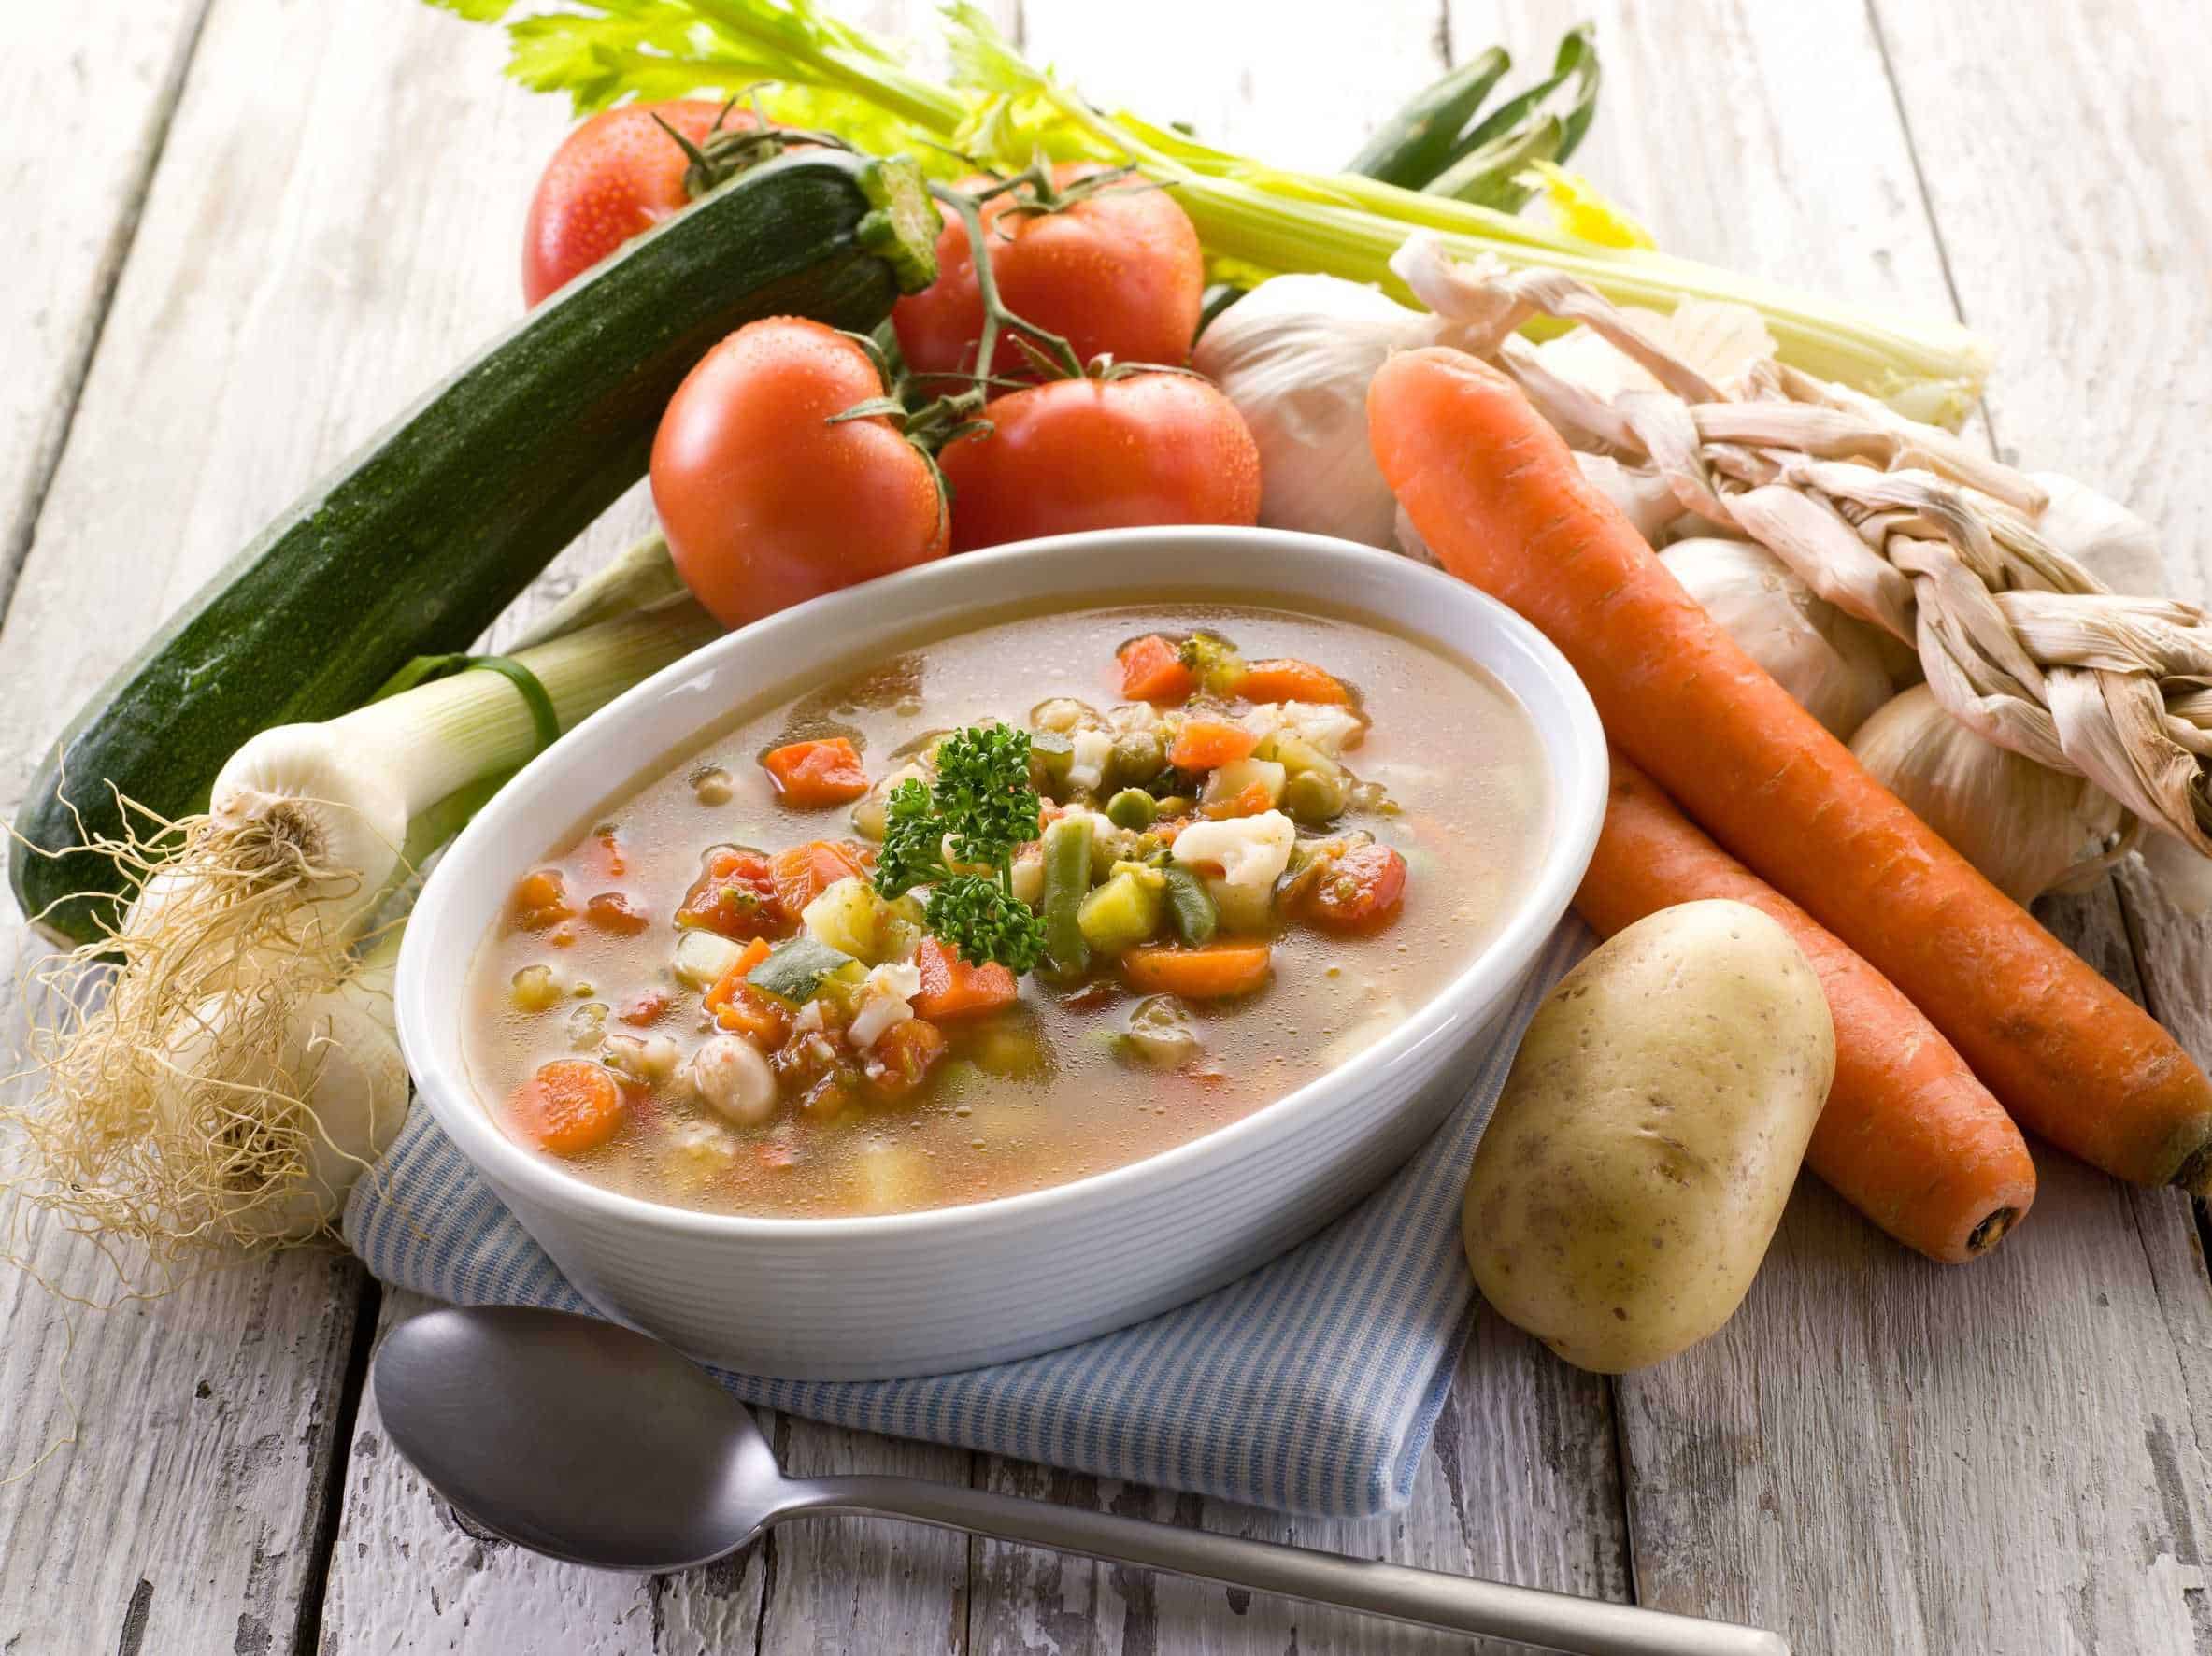 Vegetable Soup - Canning homemade soups can help you save money, gain control over what's in your food, and save you time when you need a quick meal. Make your own canned soup with one of these delicious twelve recipes today.